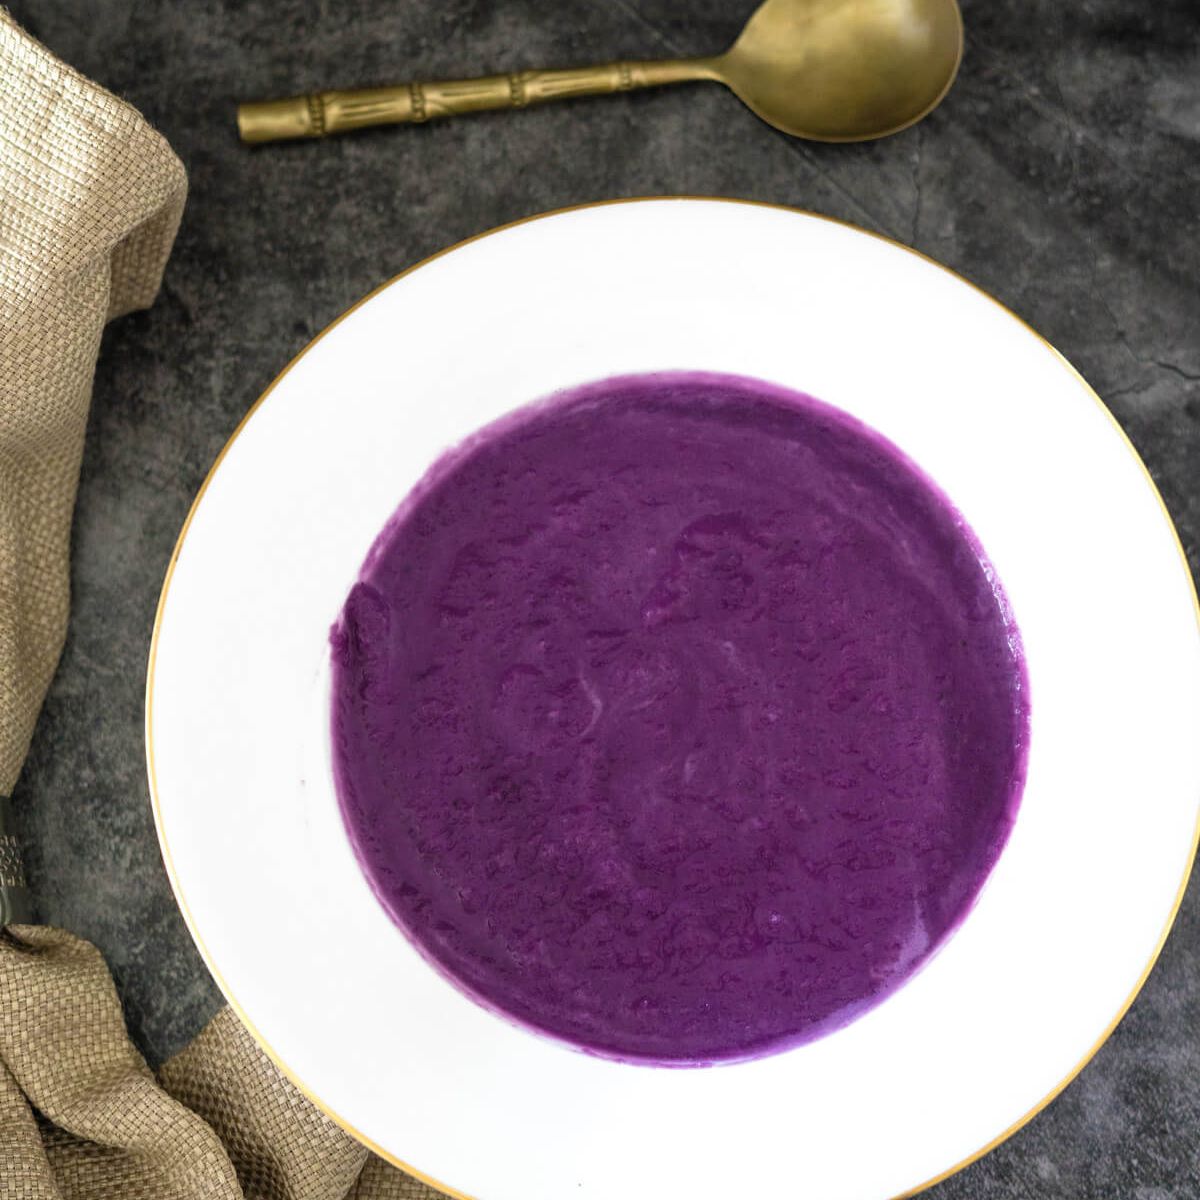 A bowl of purple soup with a spoon next to it.